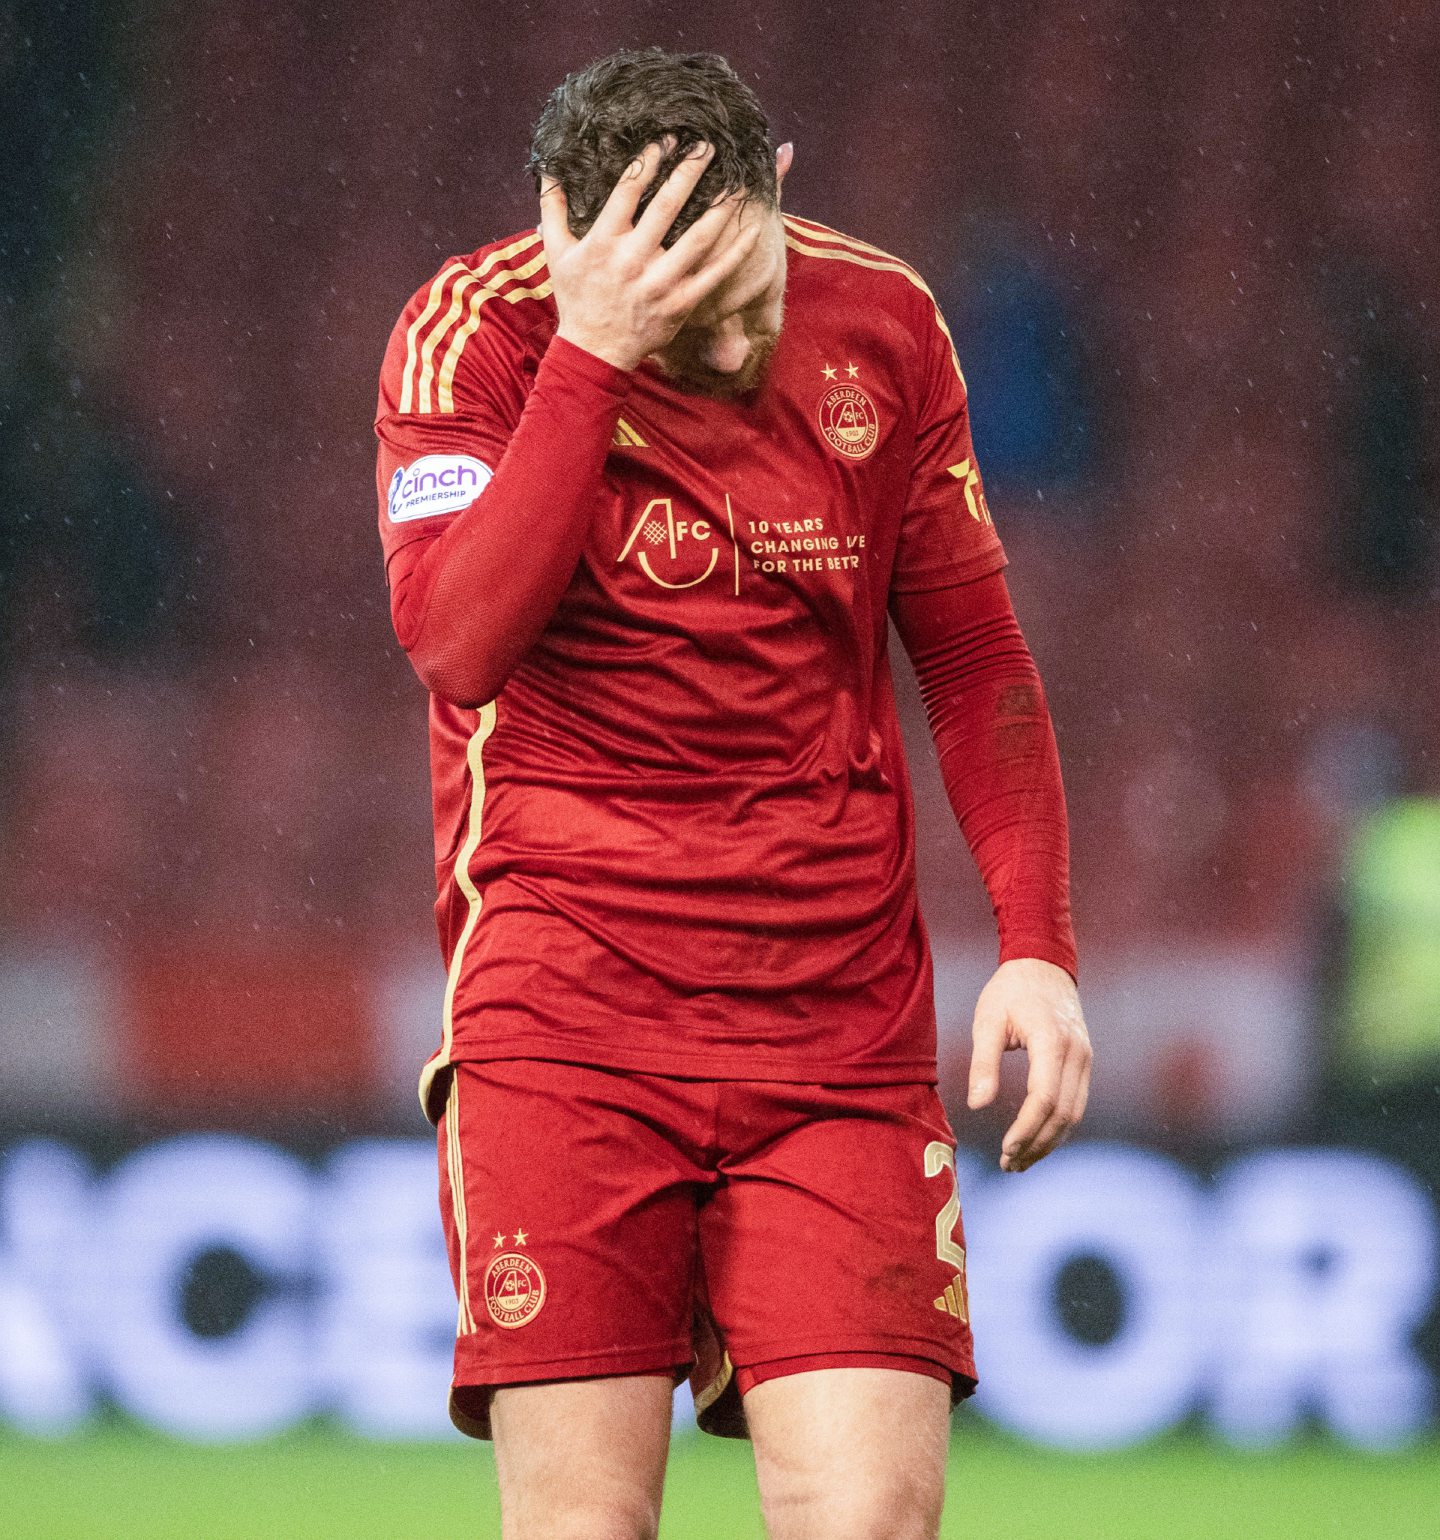 Aberdeen's Nicky Devlin looks dejected at full time after drawing 2-2 with Hibs. Image: SNS